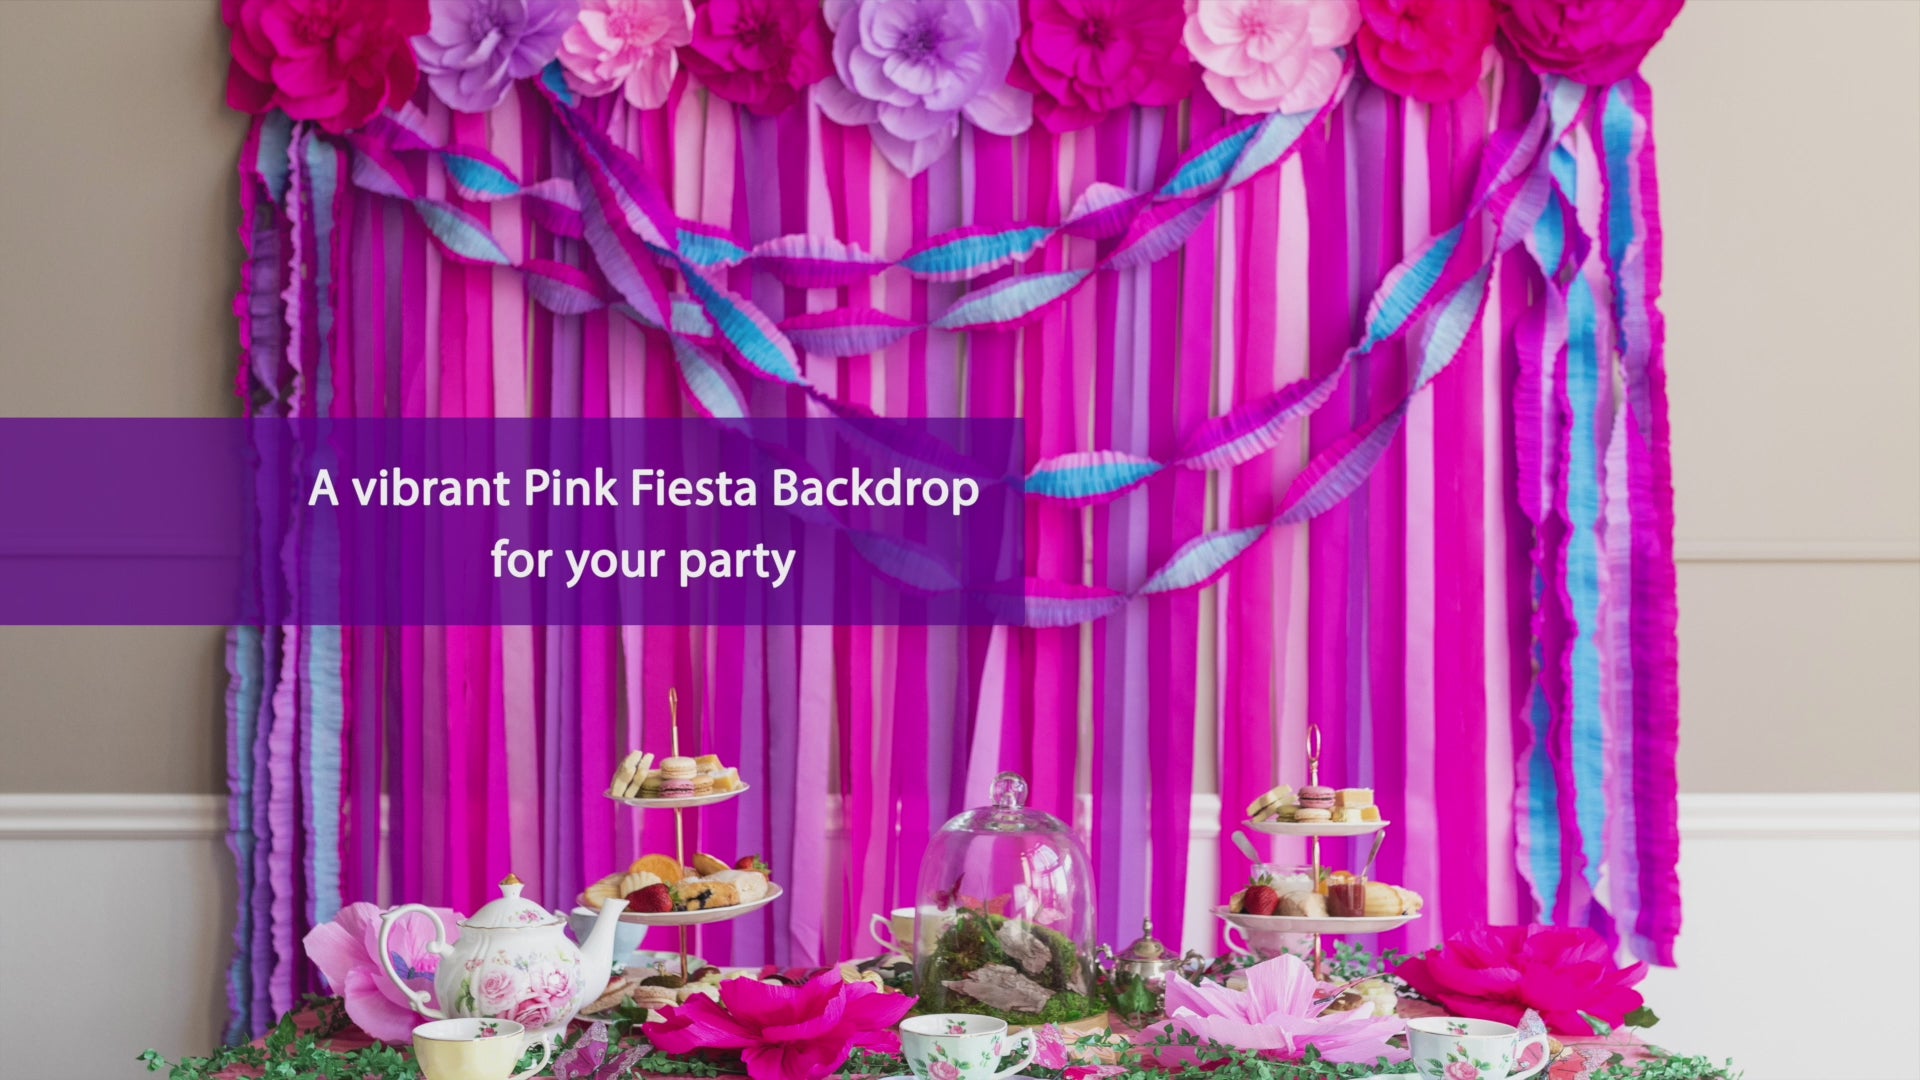 Pink Crepe Paper Streamers, Pink Party Decorations - 8 Large Rolls, 2in x  120ft Each Roll - Decorative Creped Roll for Birthday, Festival, Wedding,  Backdrop or Photo Booth Decoration and Flower Making : Arts, Crafts &  Sewing 